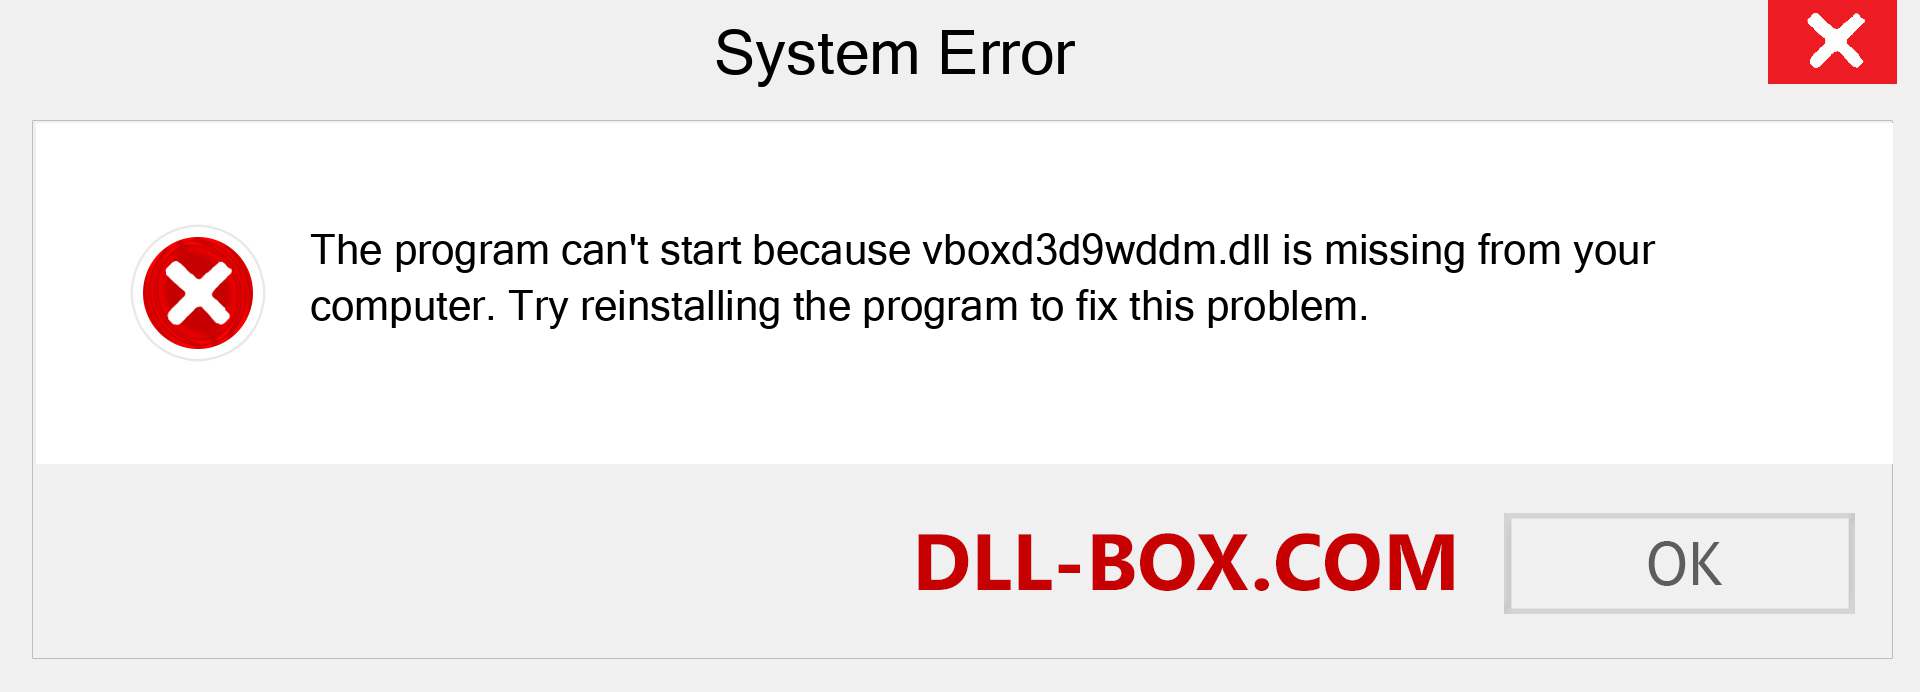  vboxd3d9wddm.dll file is missing?. Download for Windows 7, 8, 10 - Fix  vboxd3d9wddm dll Missing Error on Windows, photos, images